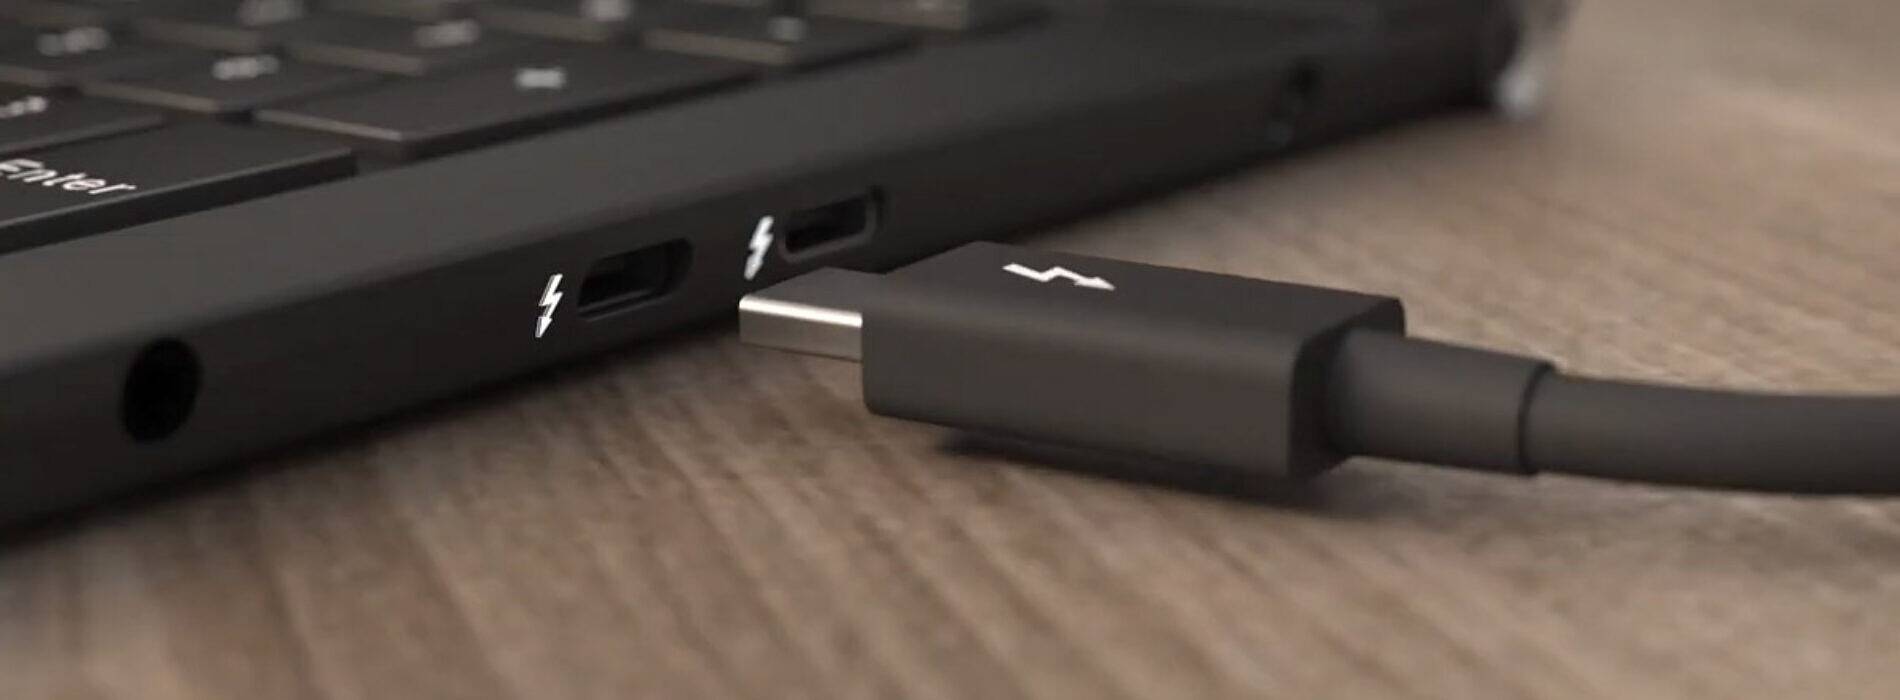 why gaming laptop chargers are Huge